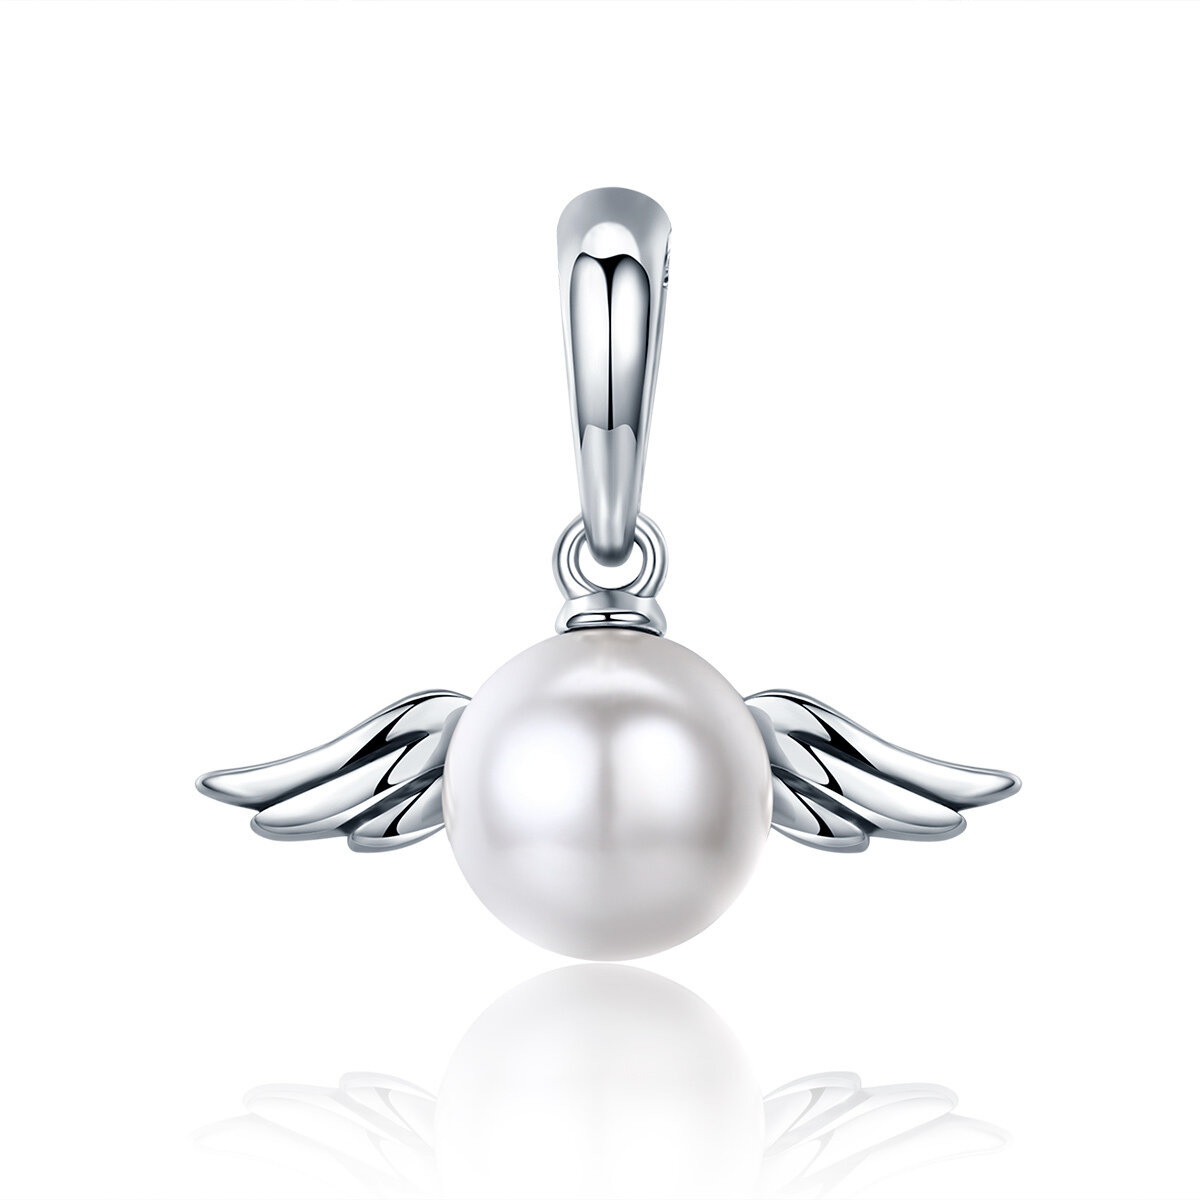 GemKing SCC381 Naughty Angel S925 Sterling Silver Charm